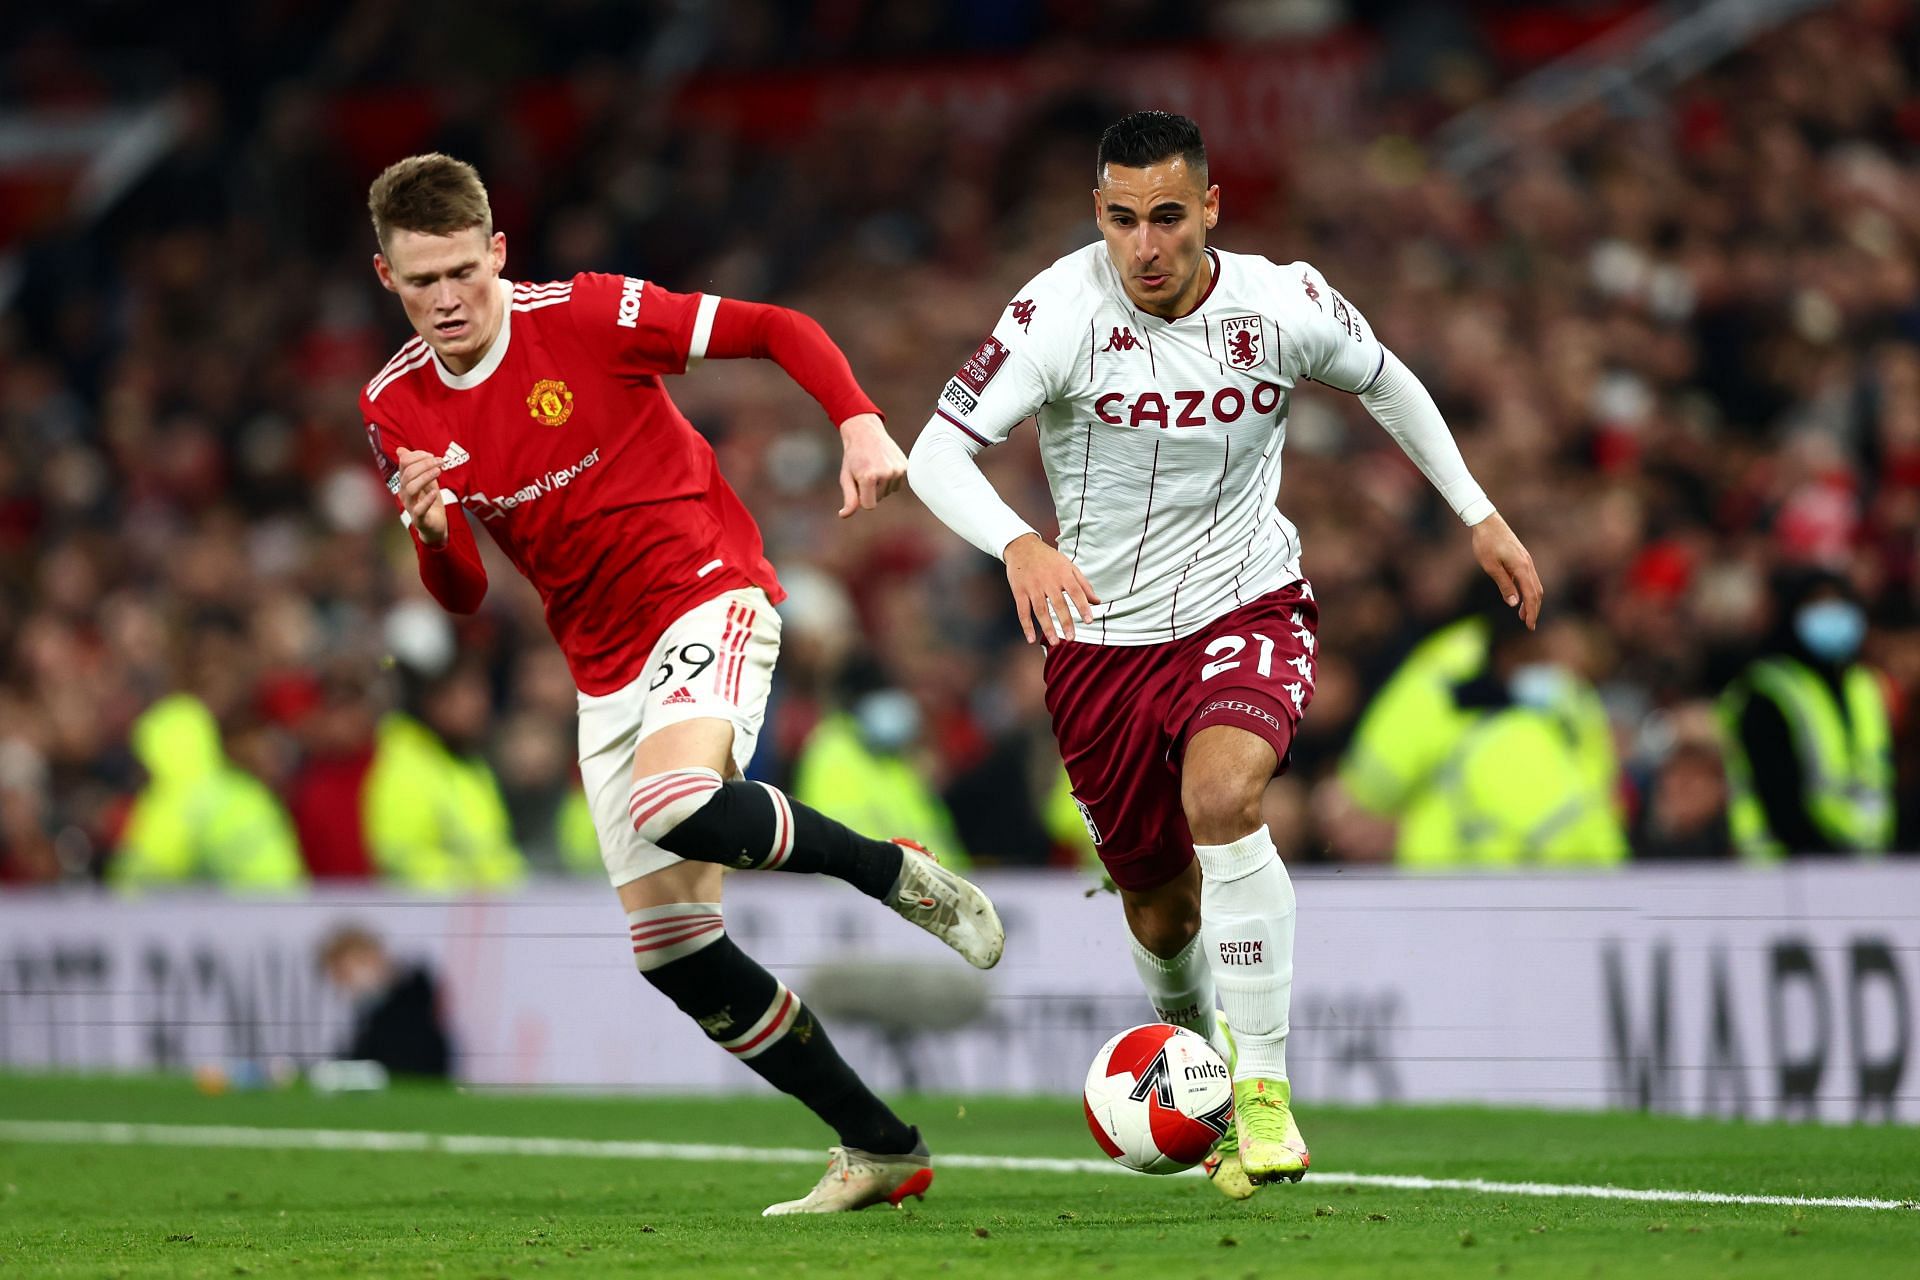 Scott McTominay (L) scored the only goal of the Manchester United v Aston Villa: The Emirates FA Cup Third Round game